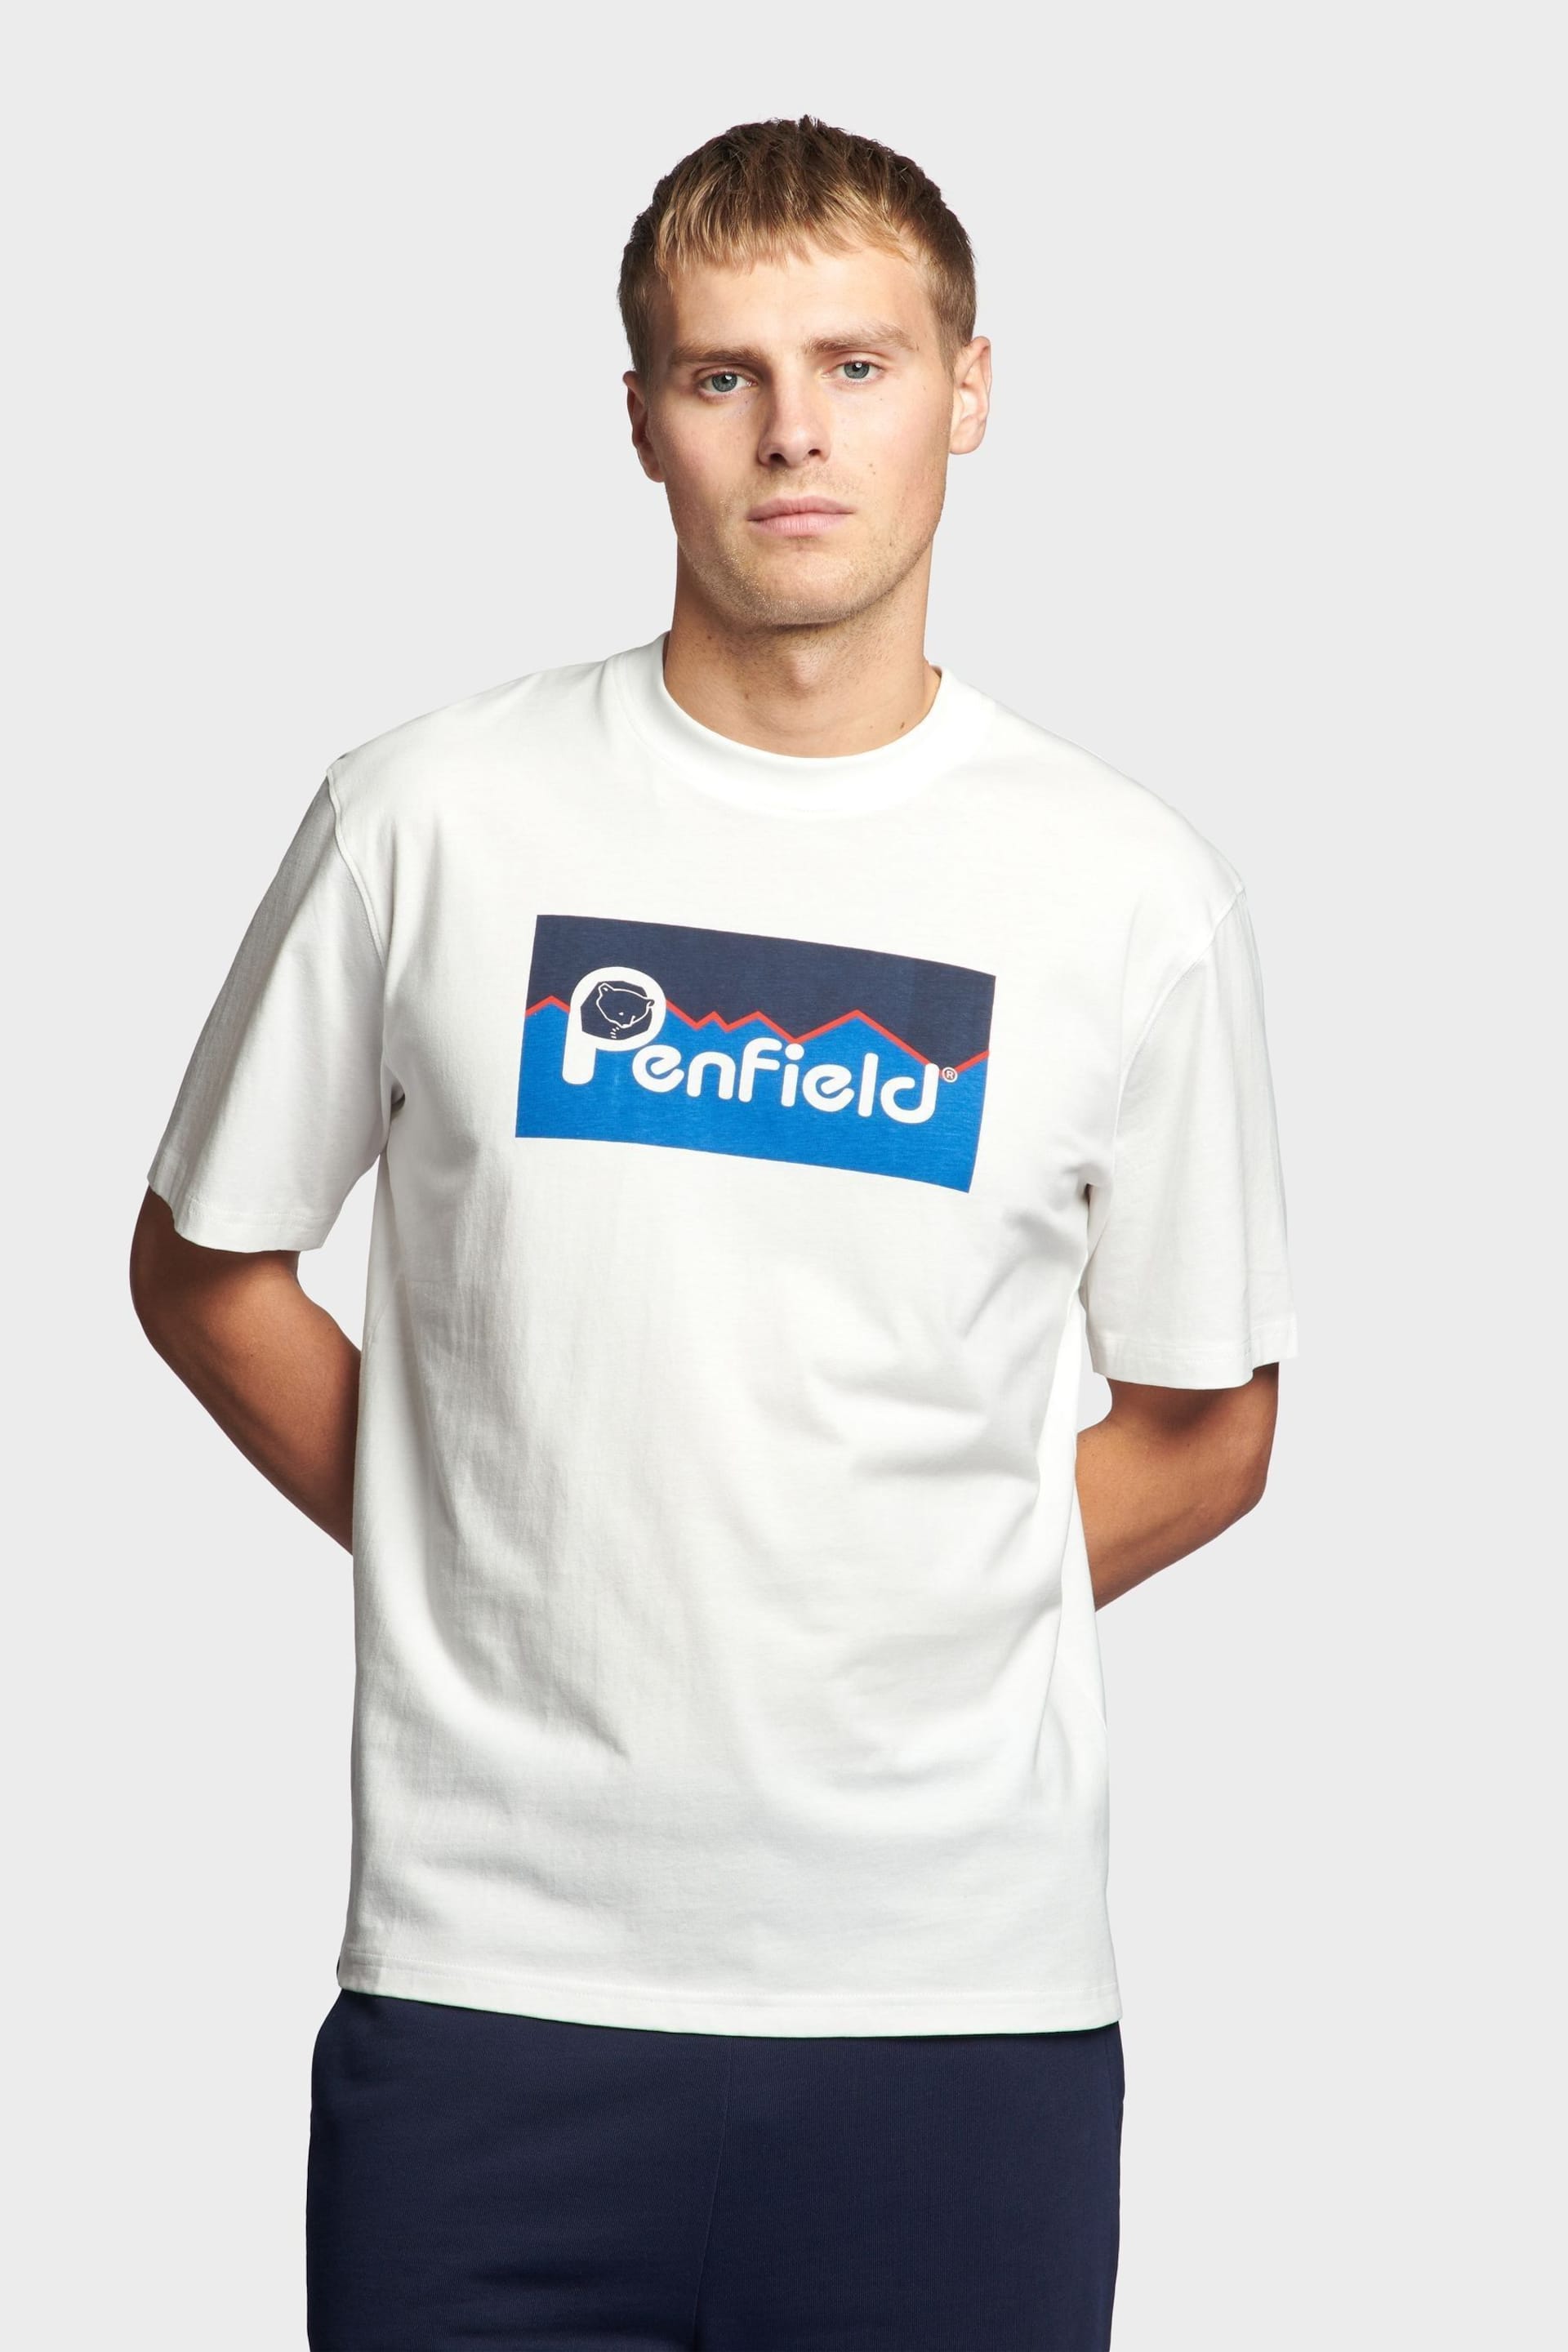 Penfield Mens Relaxed Fit Original Large Logo T-Shirt - Image 6 of 6